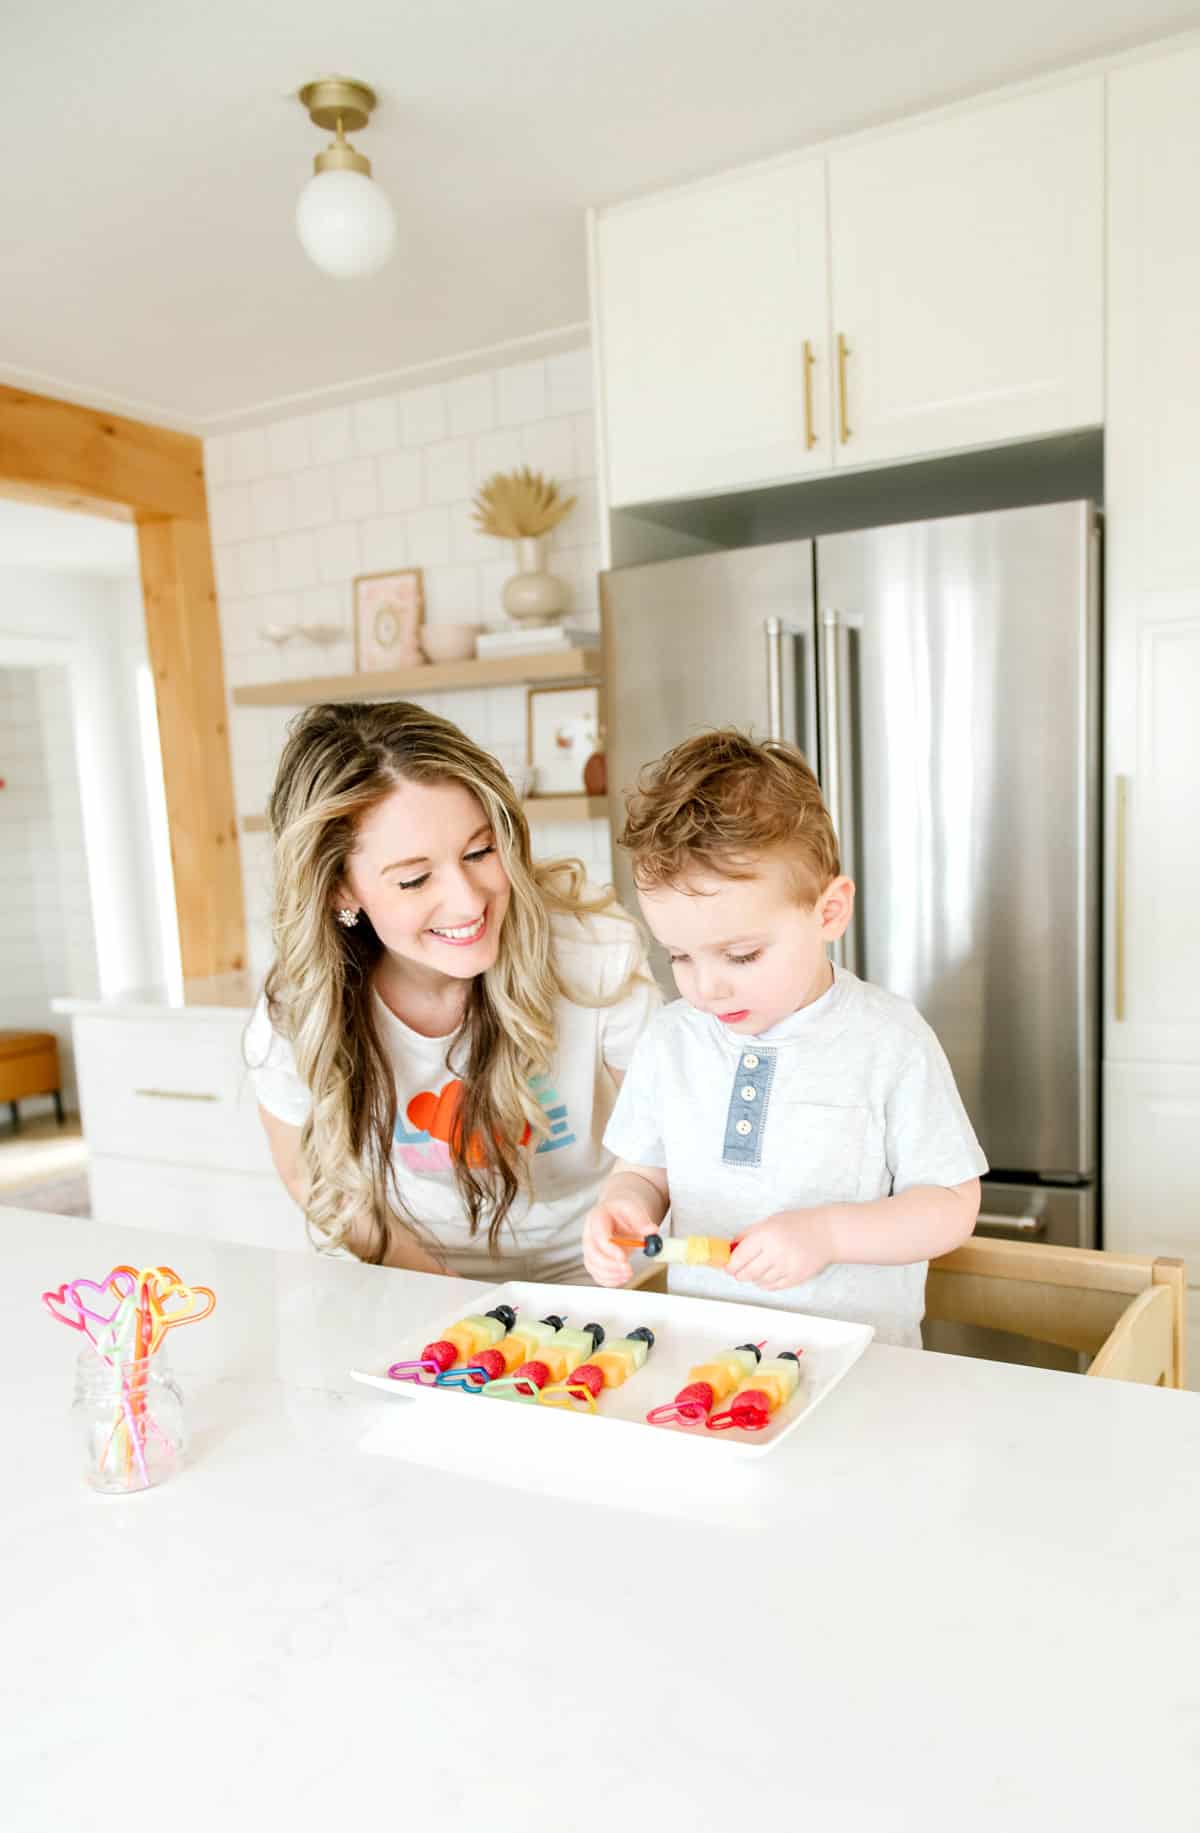 Elysia and her son making rainbow fruit skewers.